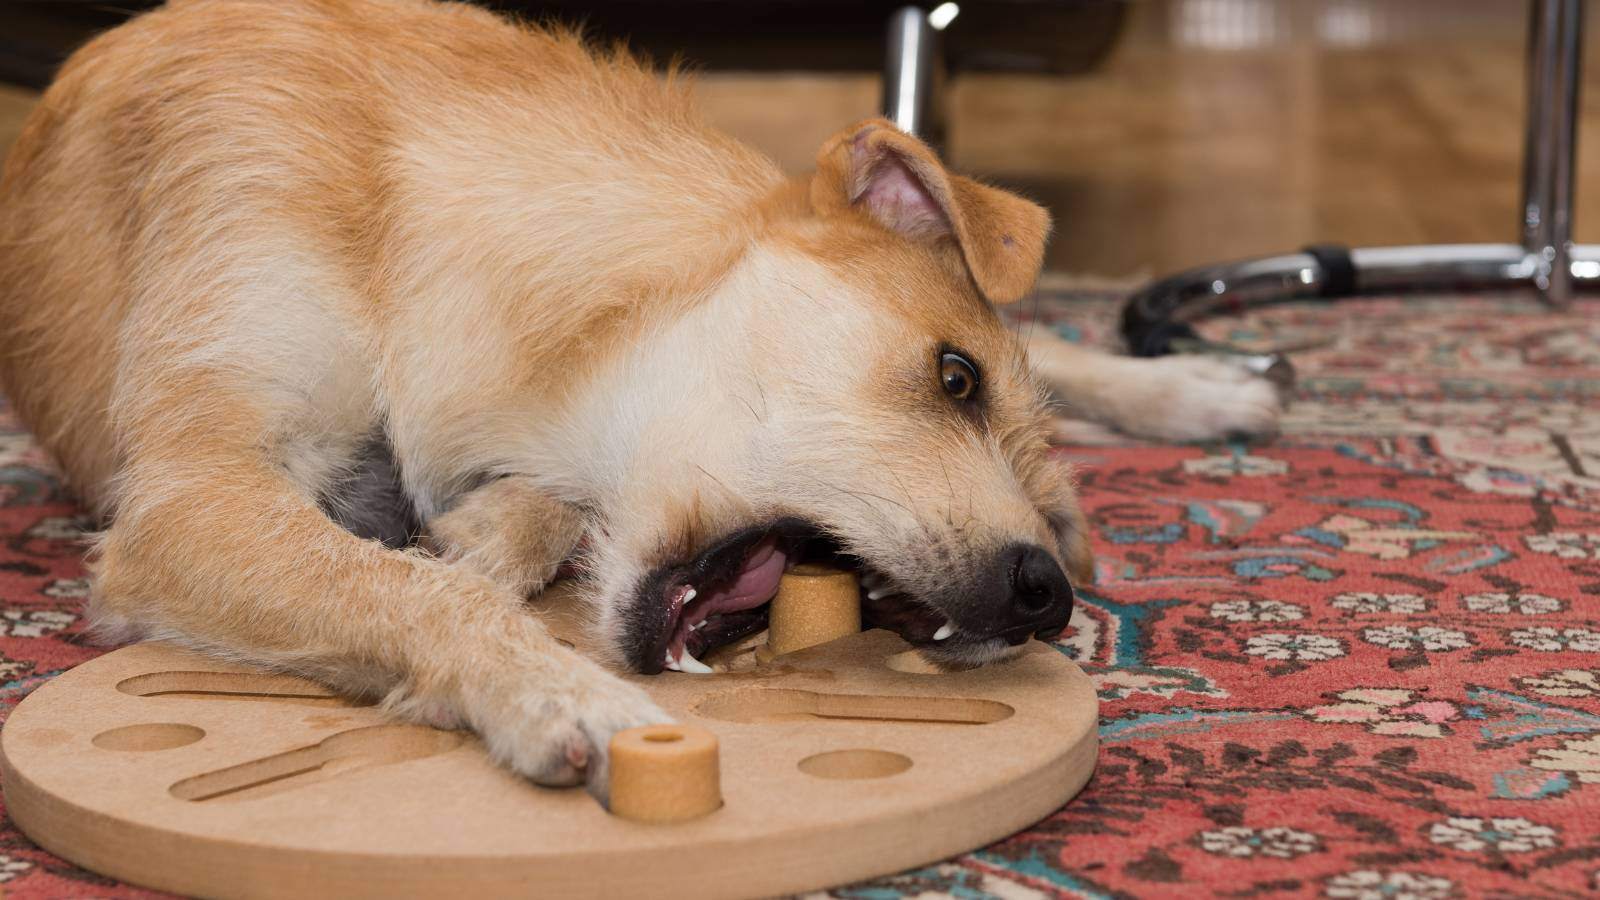 Using puzzles is a great way to help your dog use their brain